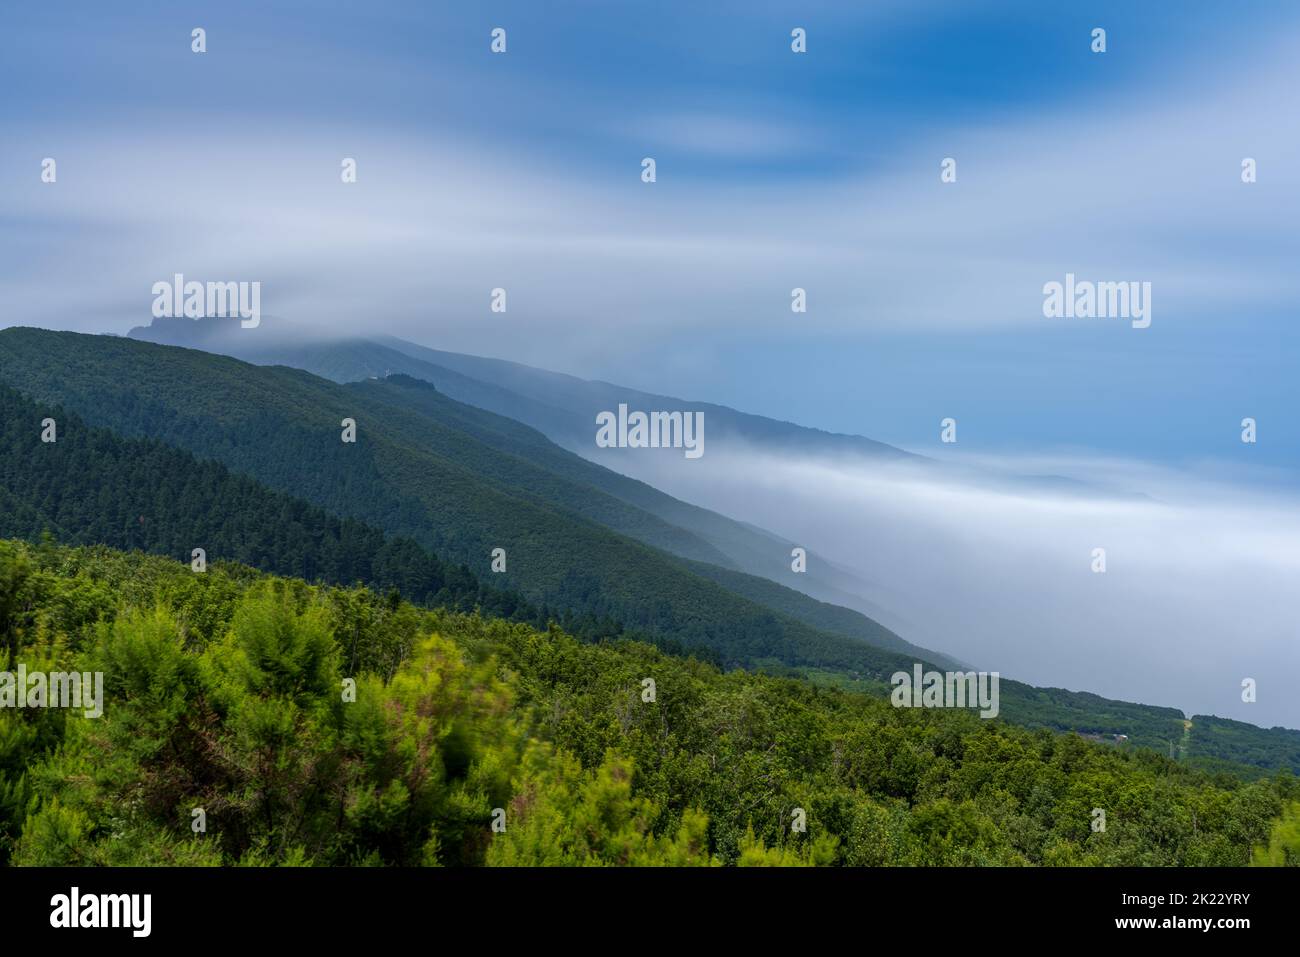 Sea of clouds over the pine tree forest, long exposure Stock Photo